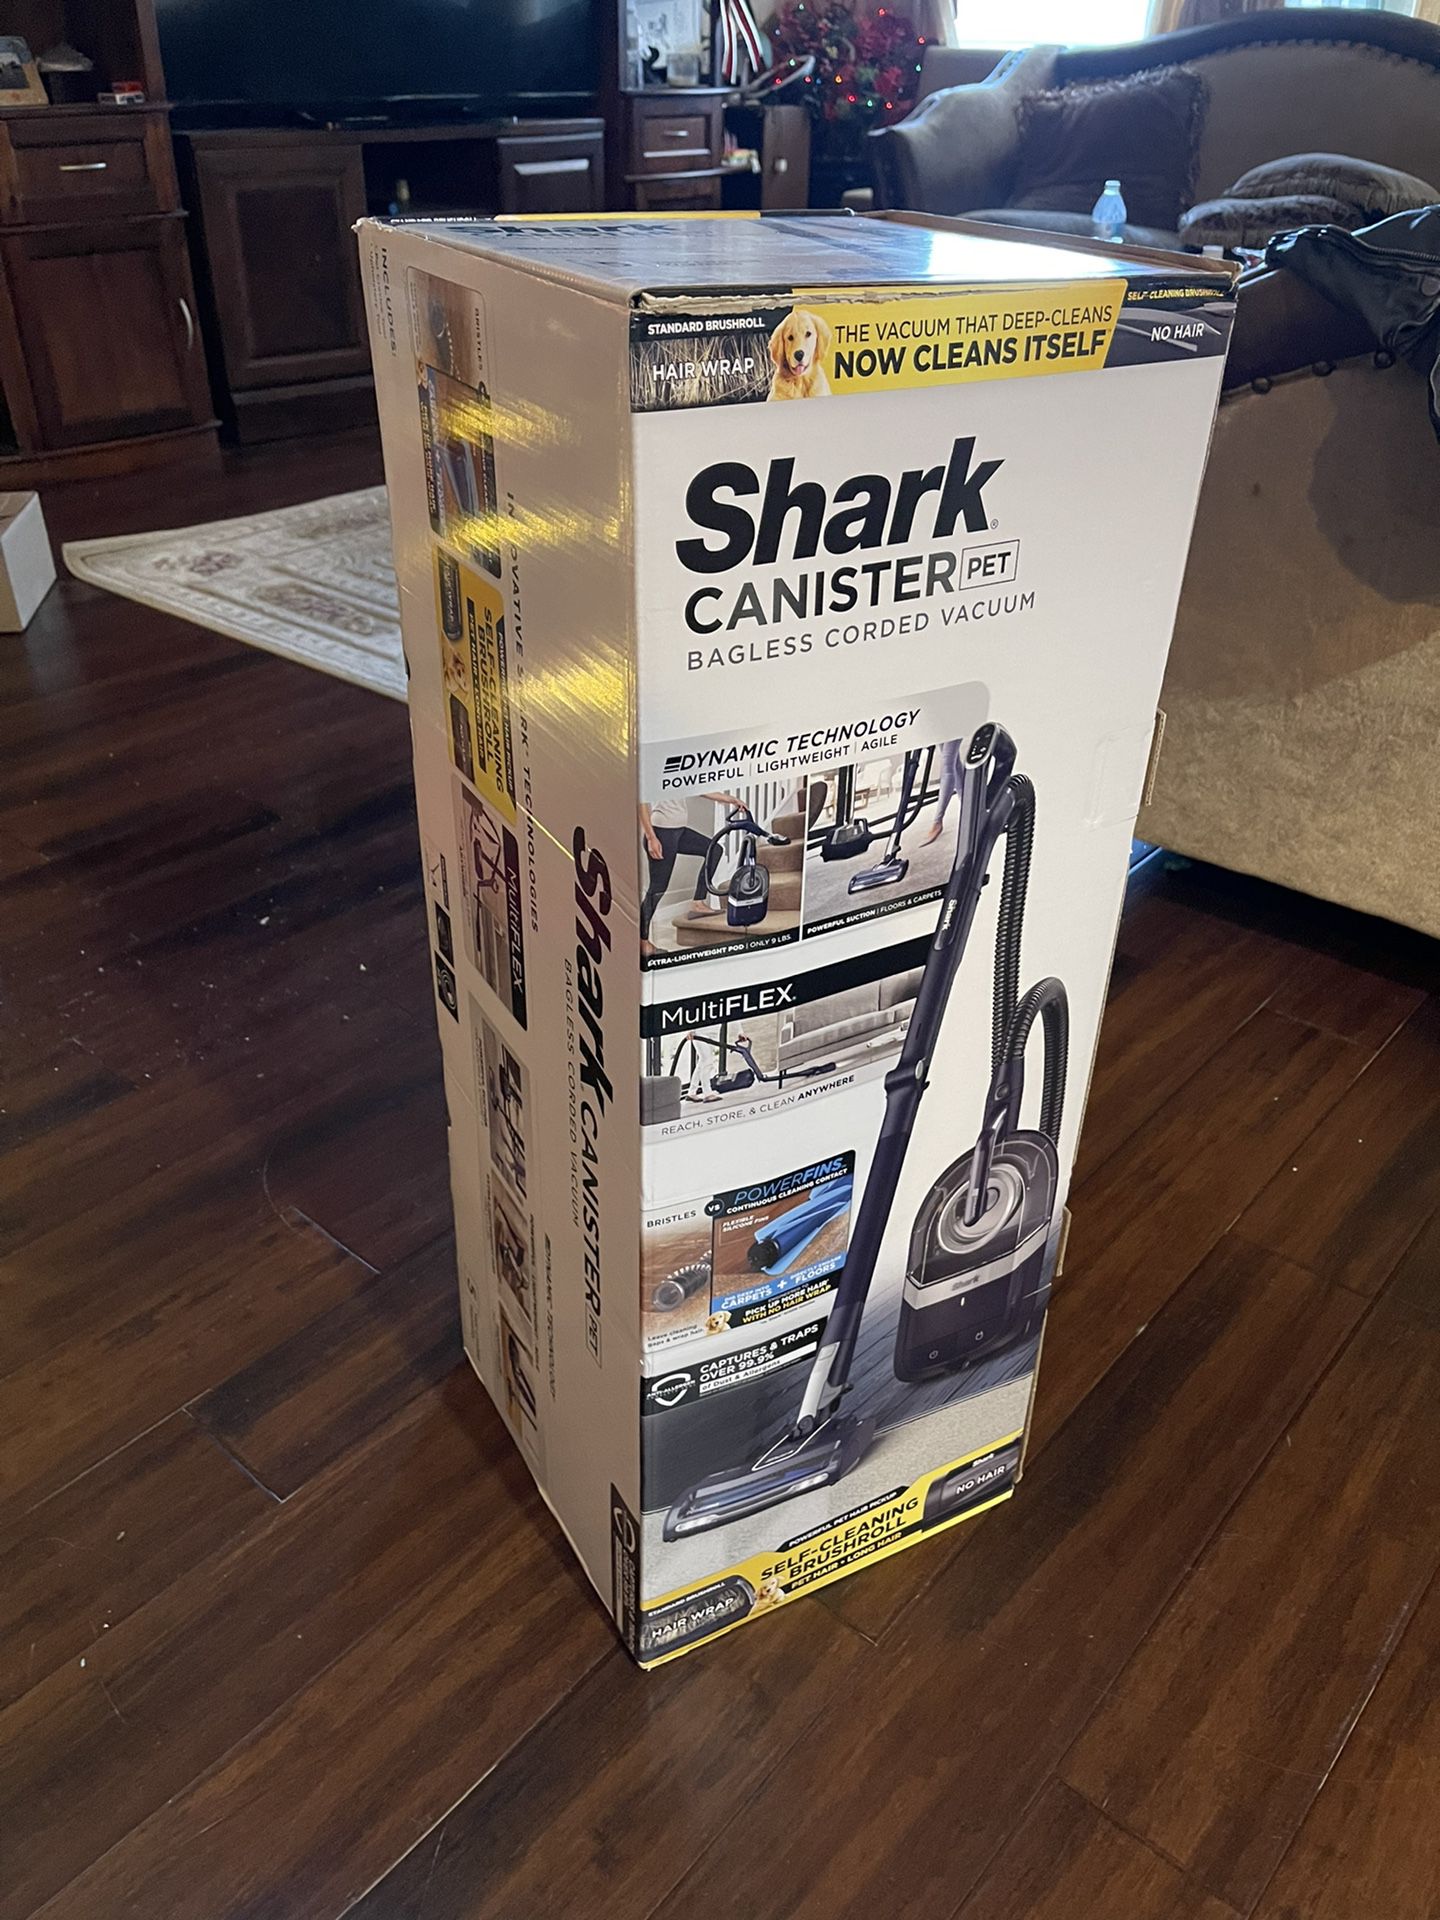 Shark Canister Pet Bagless Corded Vacuum